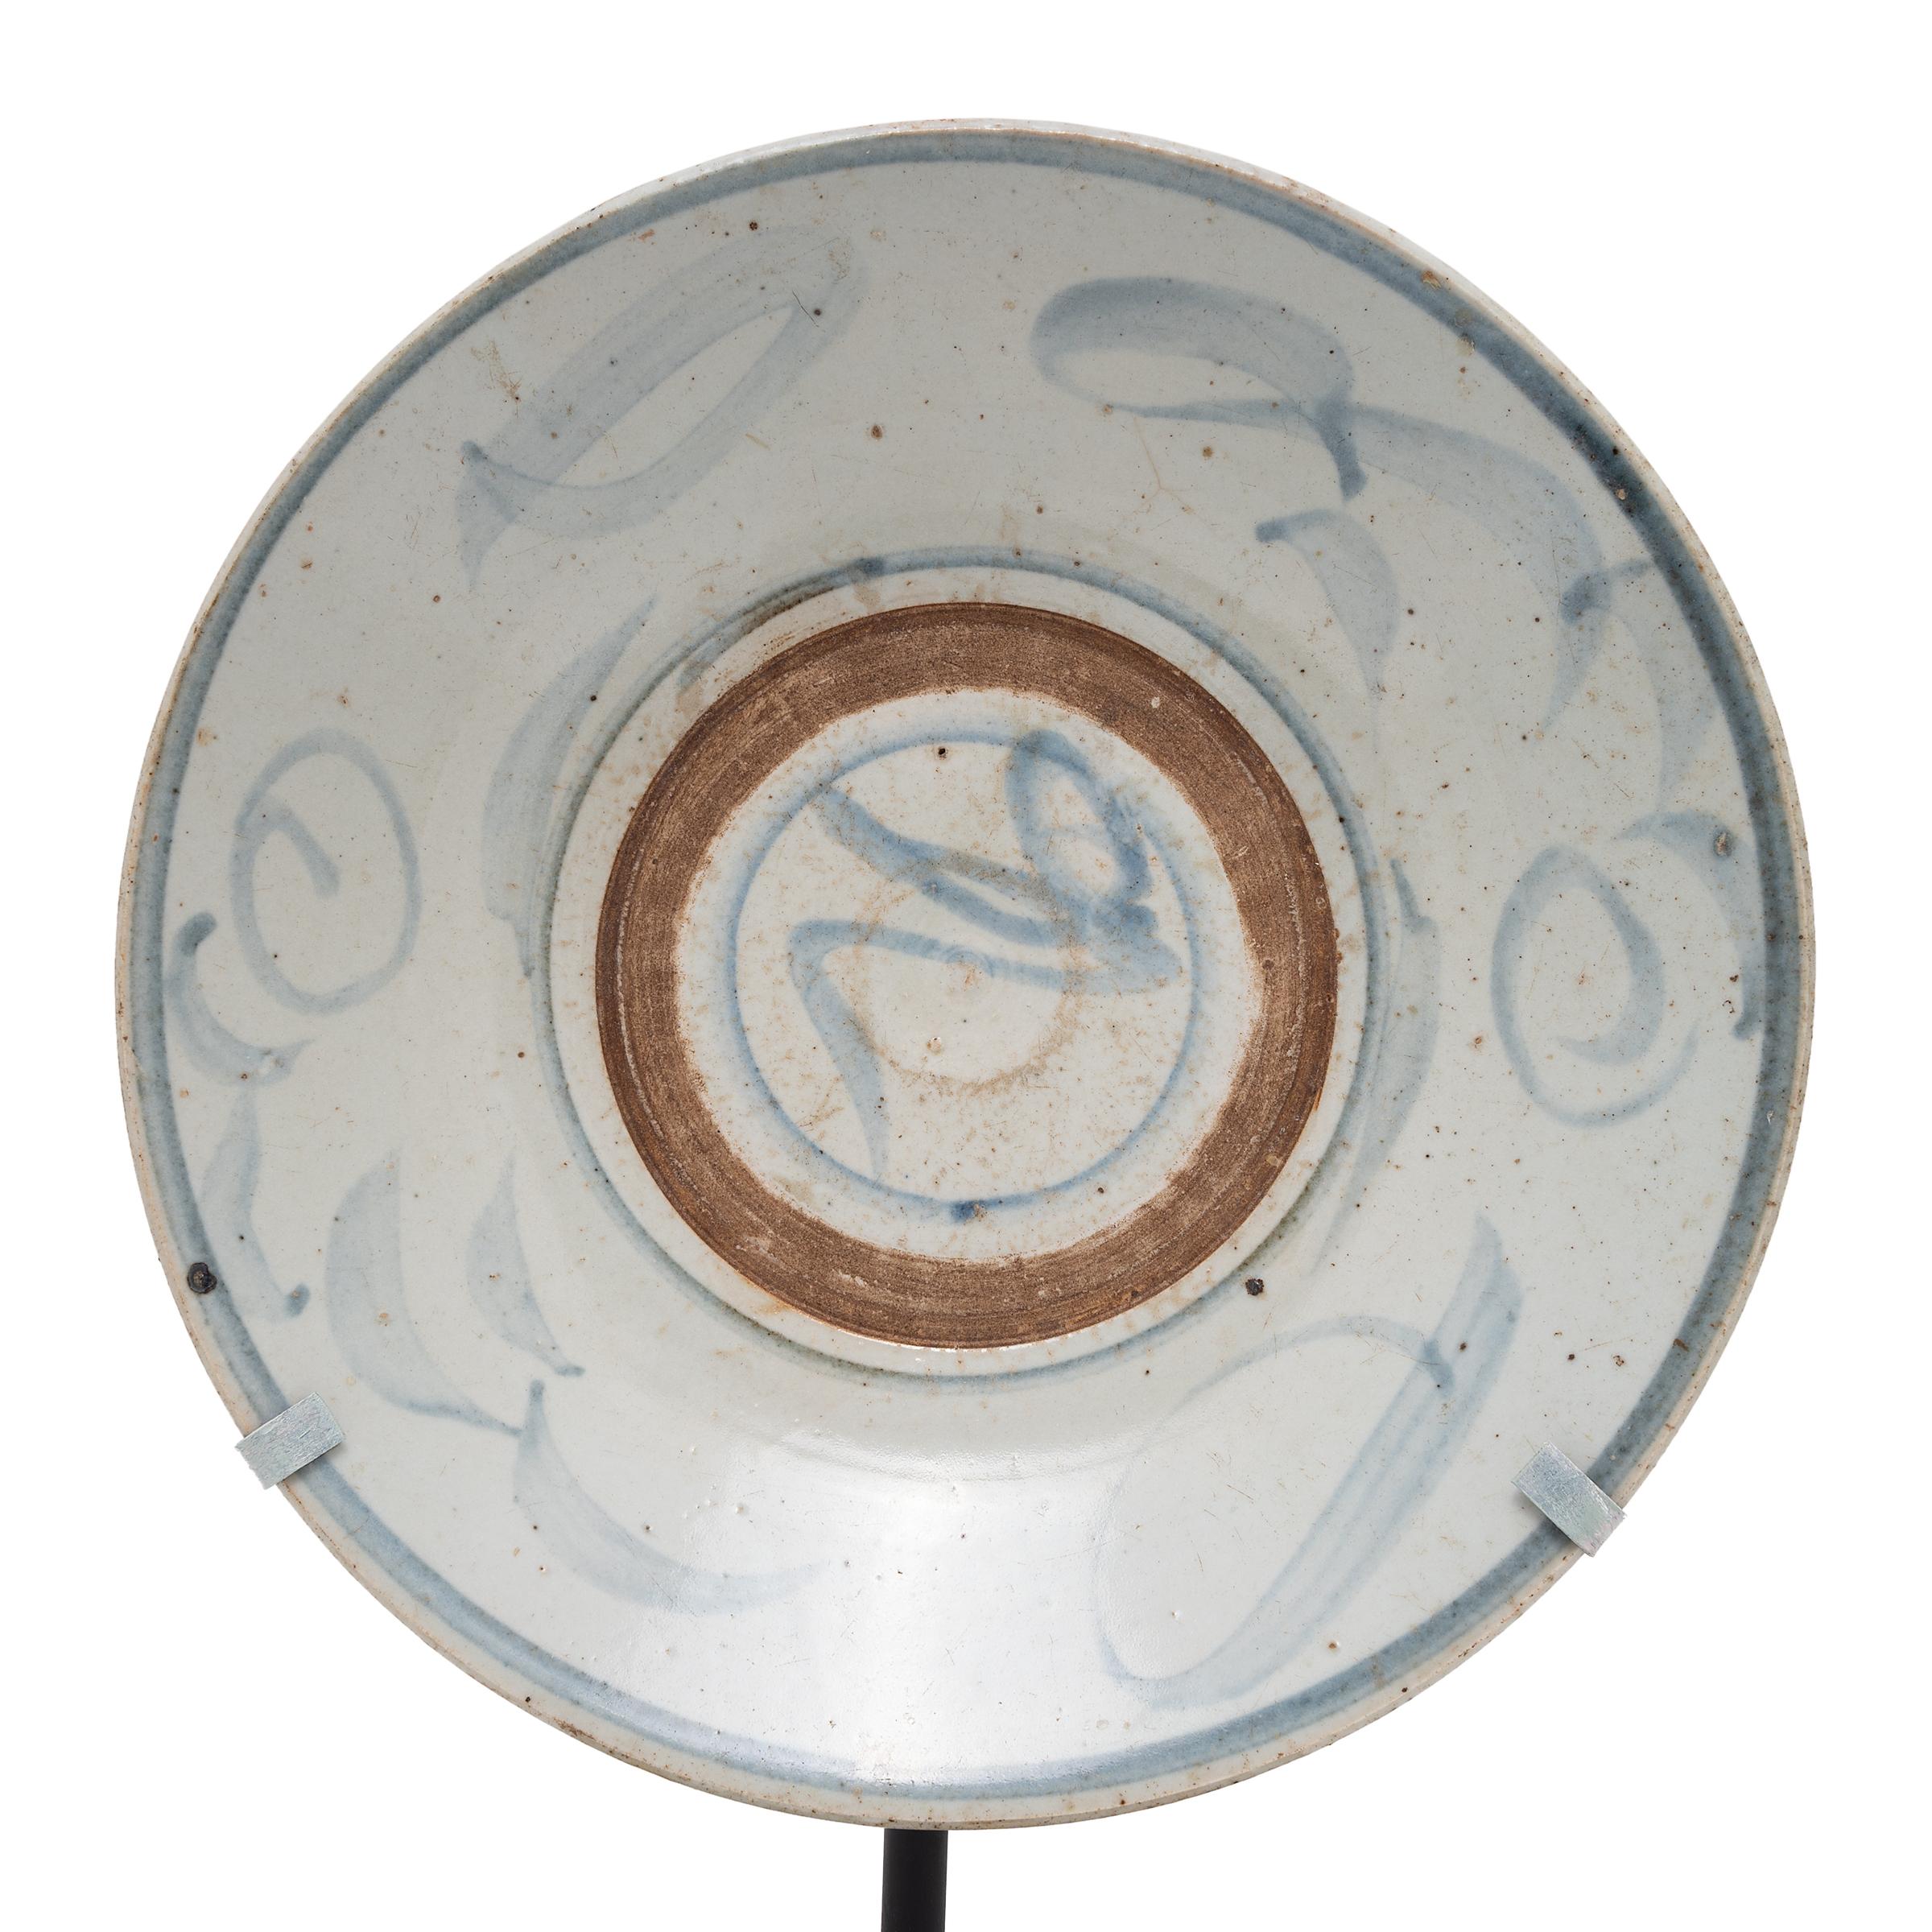 Calligraphic sweeps of blue bring this 19th-century footed plate to life, brushed atop a blue-grey glaze that cloaks its simple ceramic form. Once used as an everyday serving dish, this rustic plate has been reimagined as a tabletop sculpture,